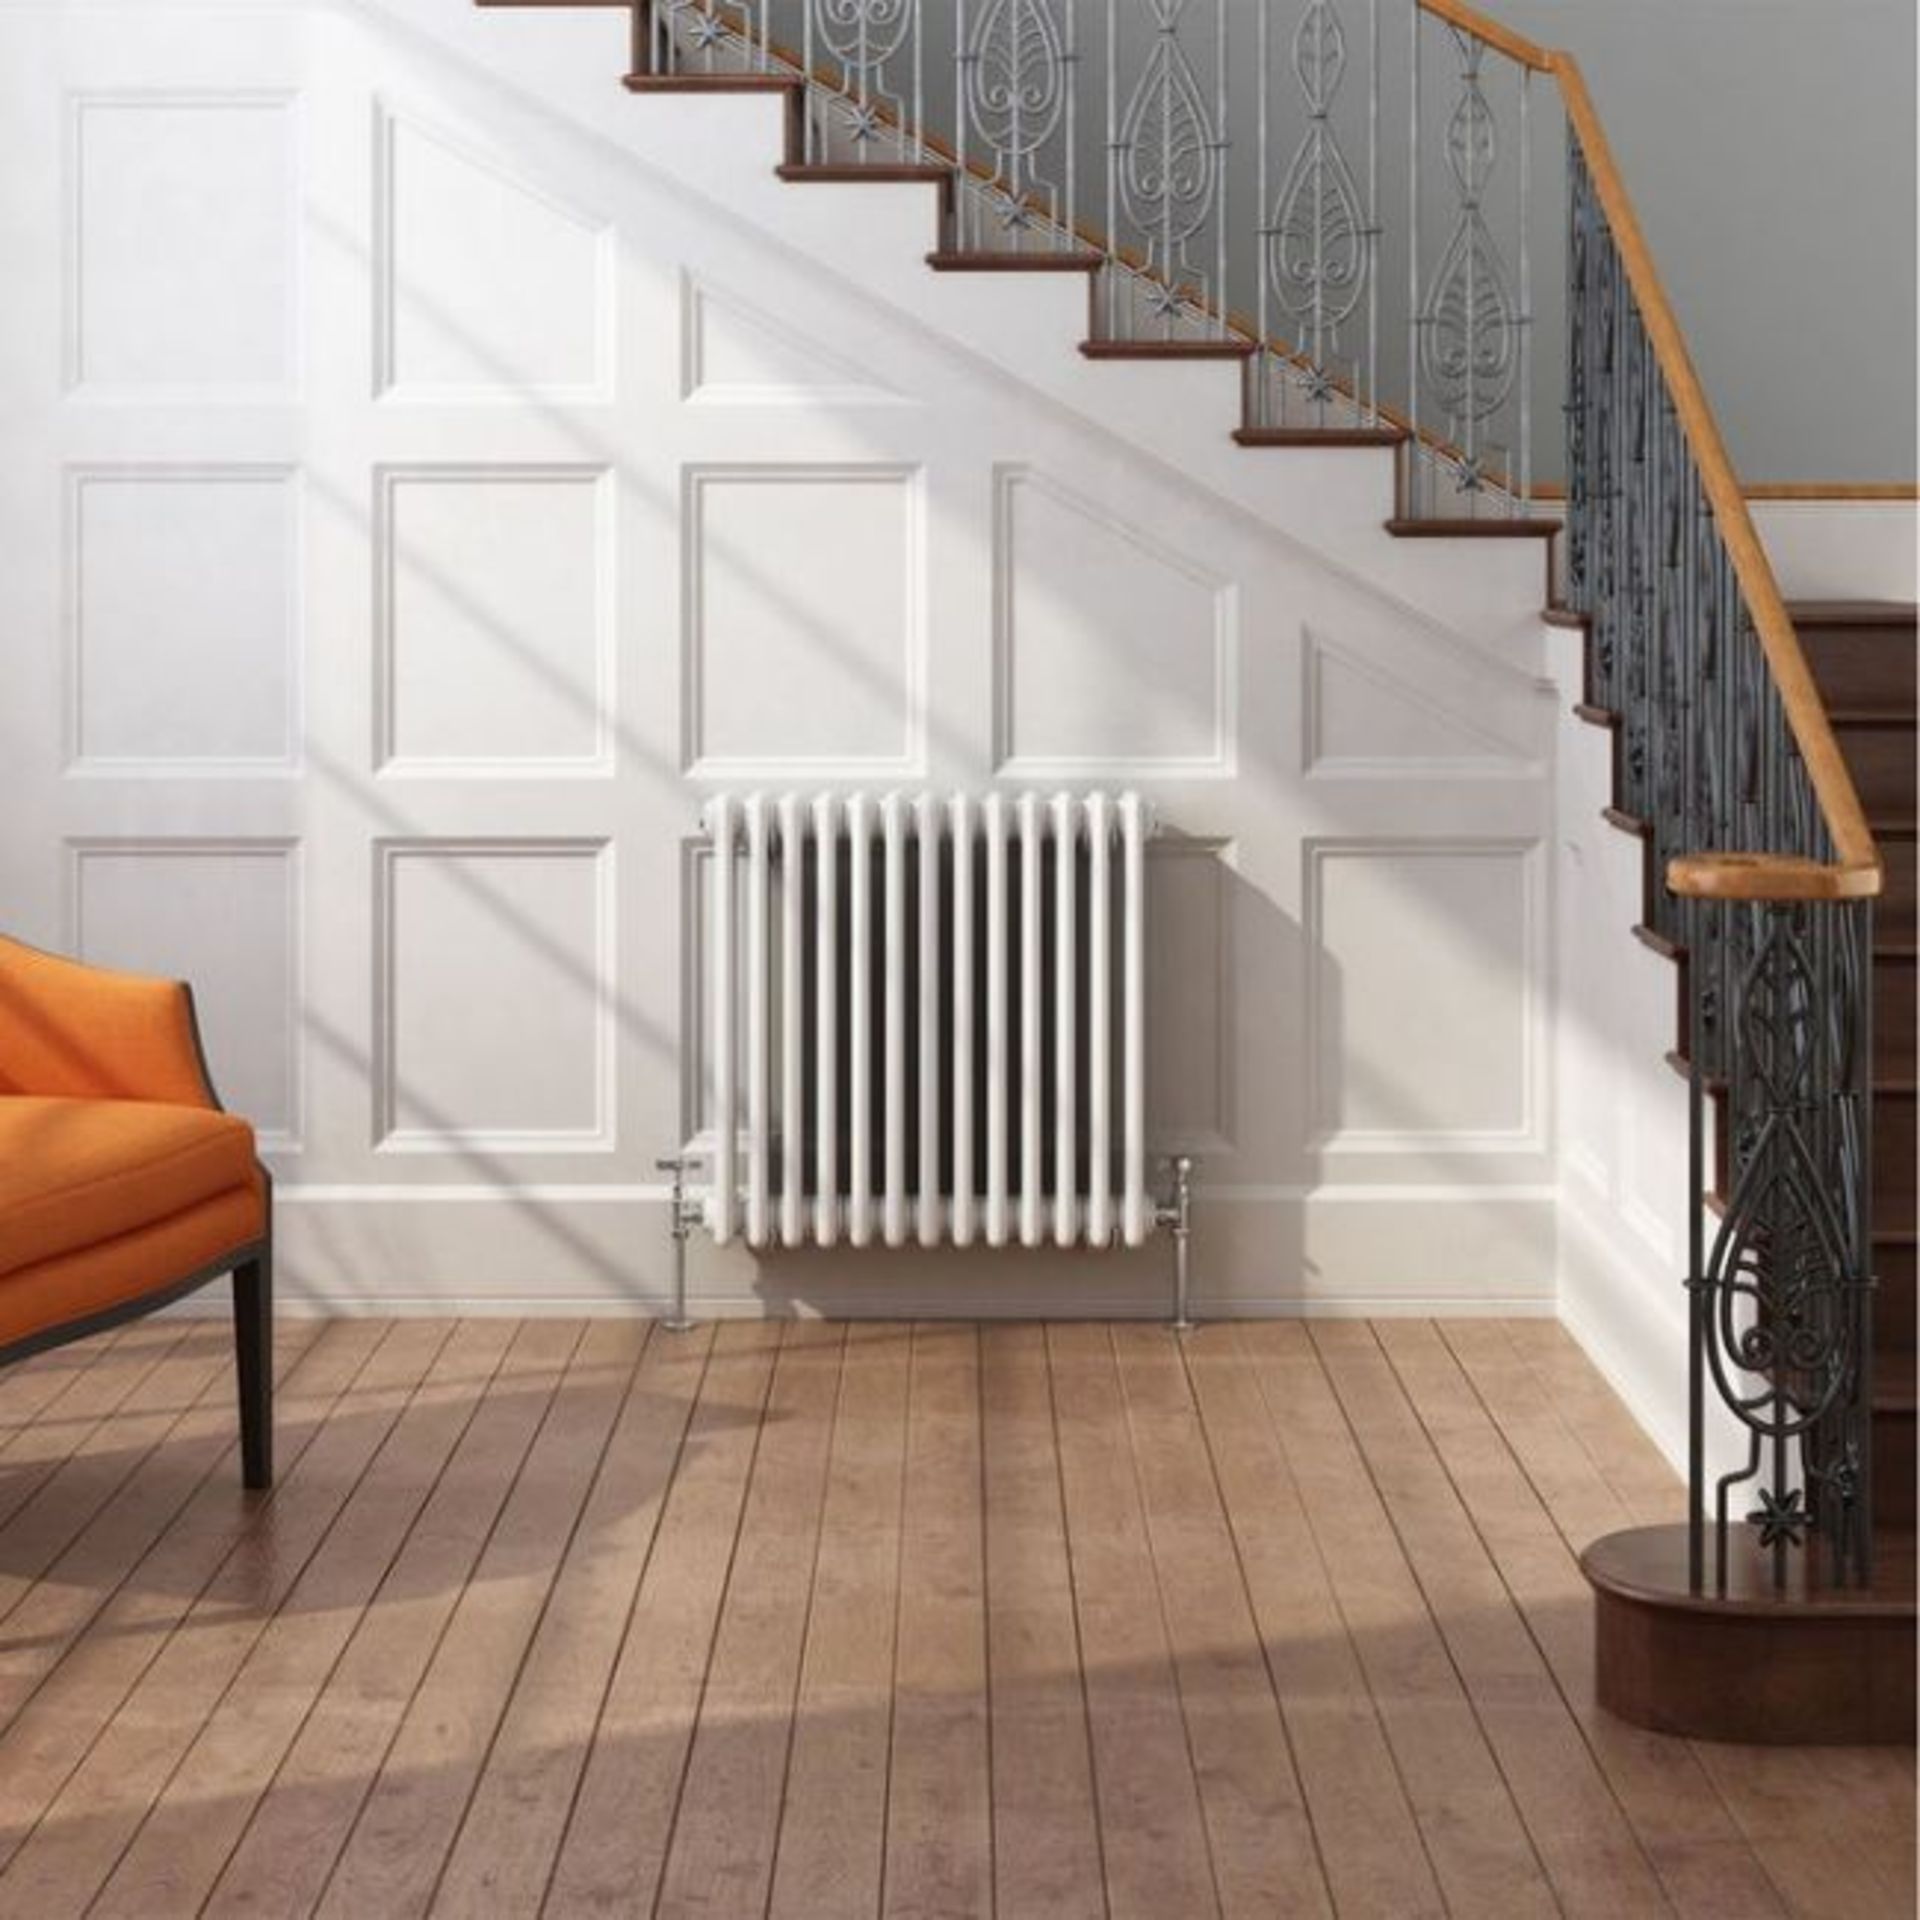 (ED18) 500x628mm White Double Panel Horizontal Colosseum Traditional Radiator.RRP £444.99.For